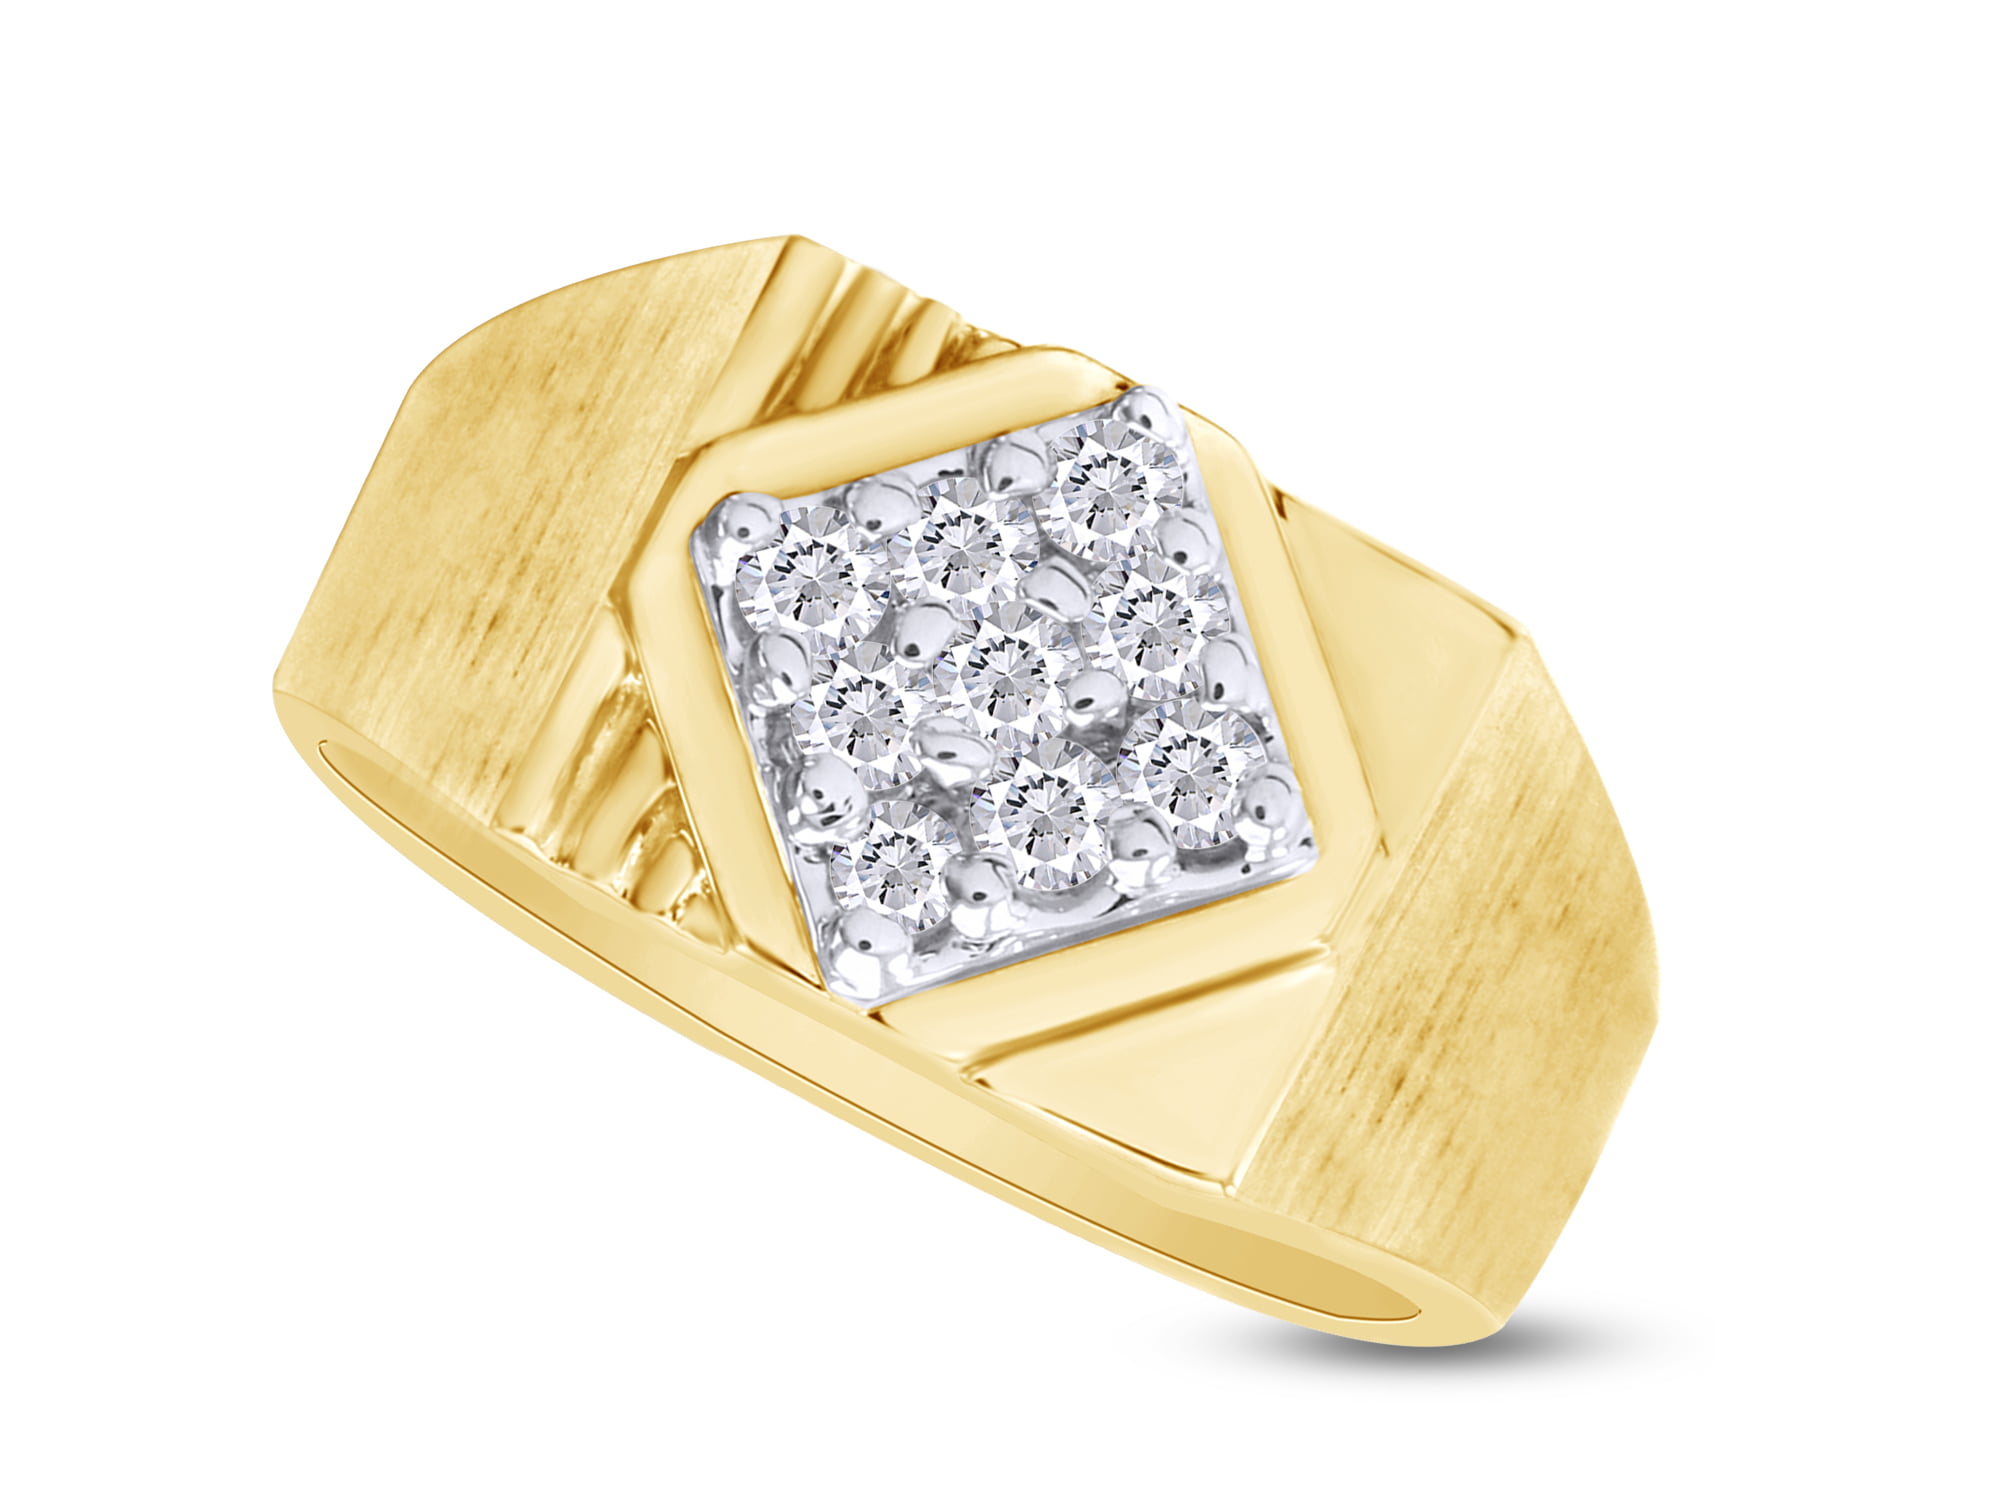 Wishrocks 14K Gold Over Sterling Silver Diamond Accent Mens Anniversary & Wedding Band Ring